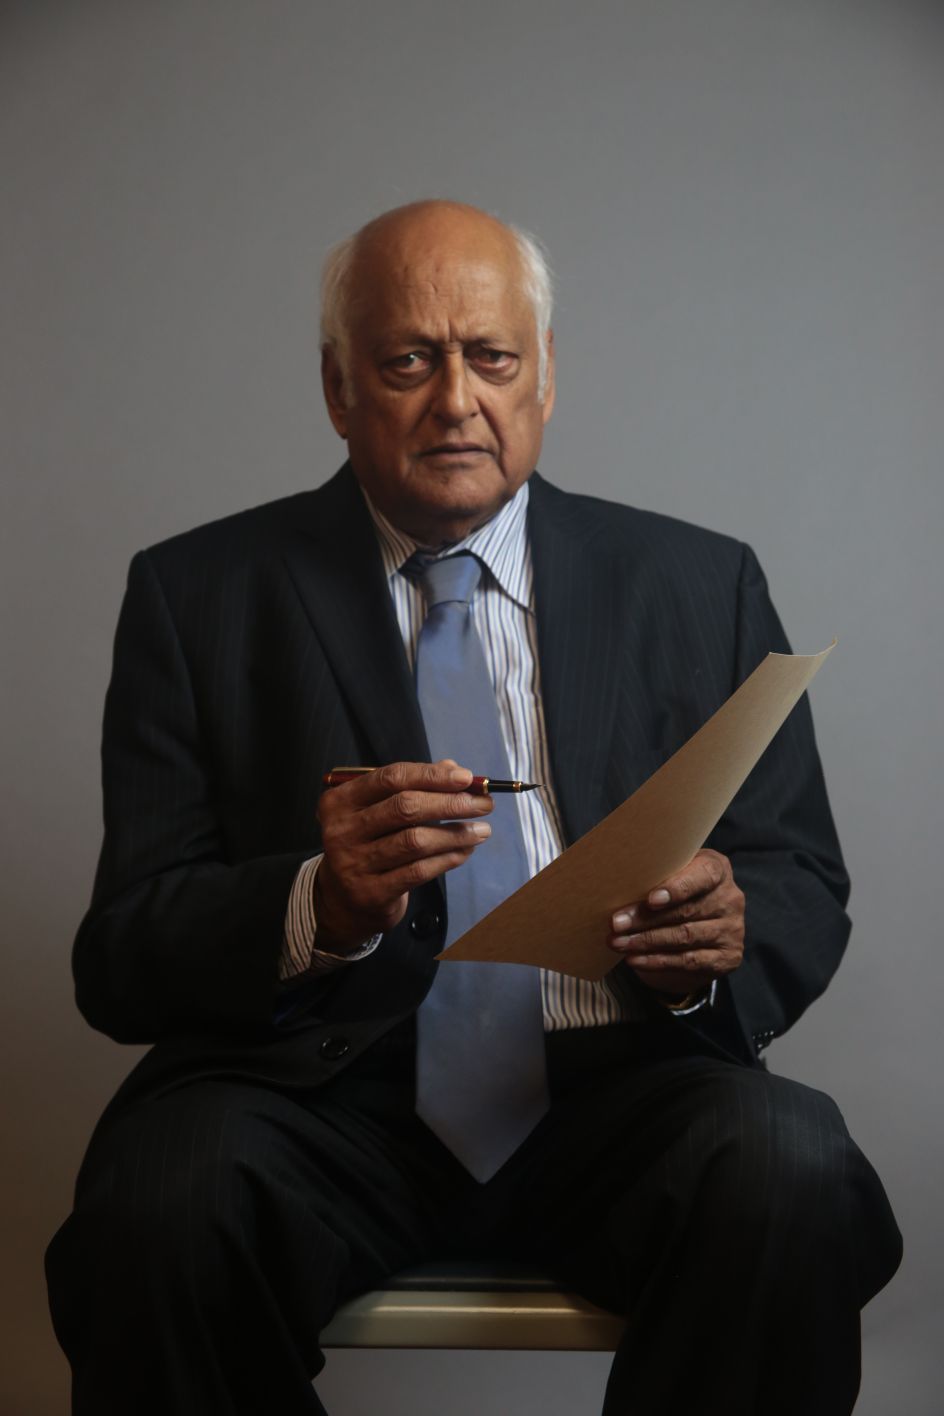 Ray Singh Swansea, 2018 Scarlett Crawford, 2018.  “Ray Singh was the first BAME District Judge appointed in Wales. He has worked in race relations for over 30 years. By holding the parchment and paper he wanted to convey that whilst the Race Relations Acts were necessary, there is still a lot more work to be done.”  © UK Parliament